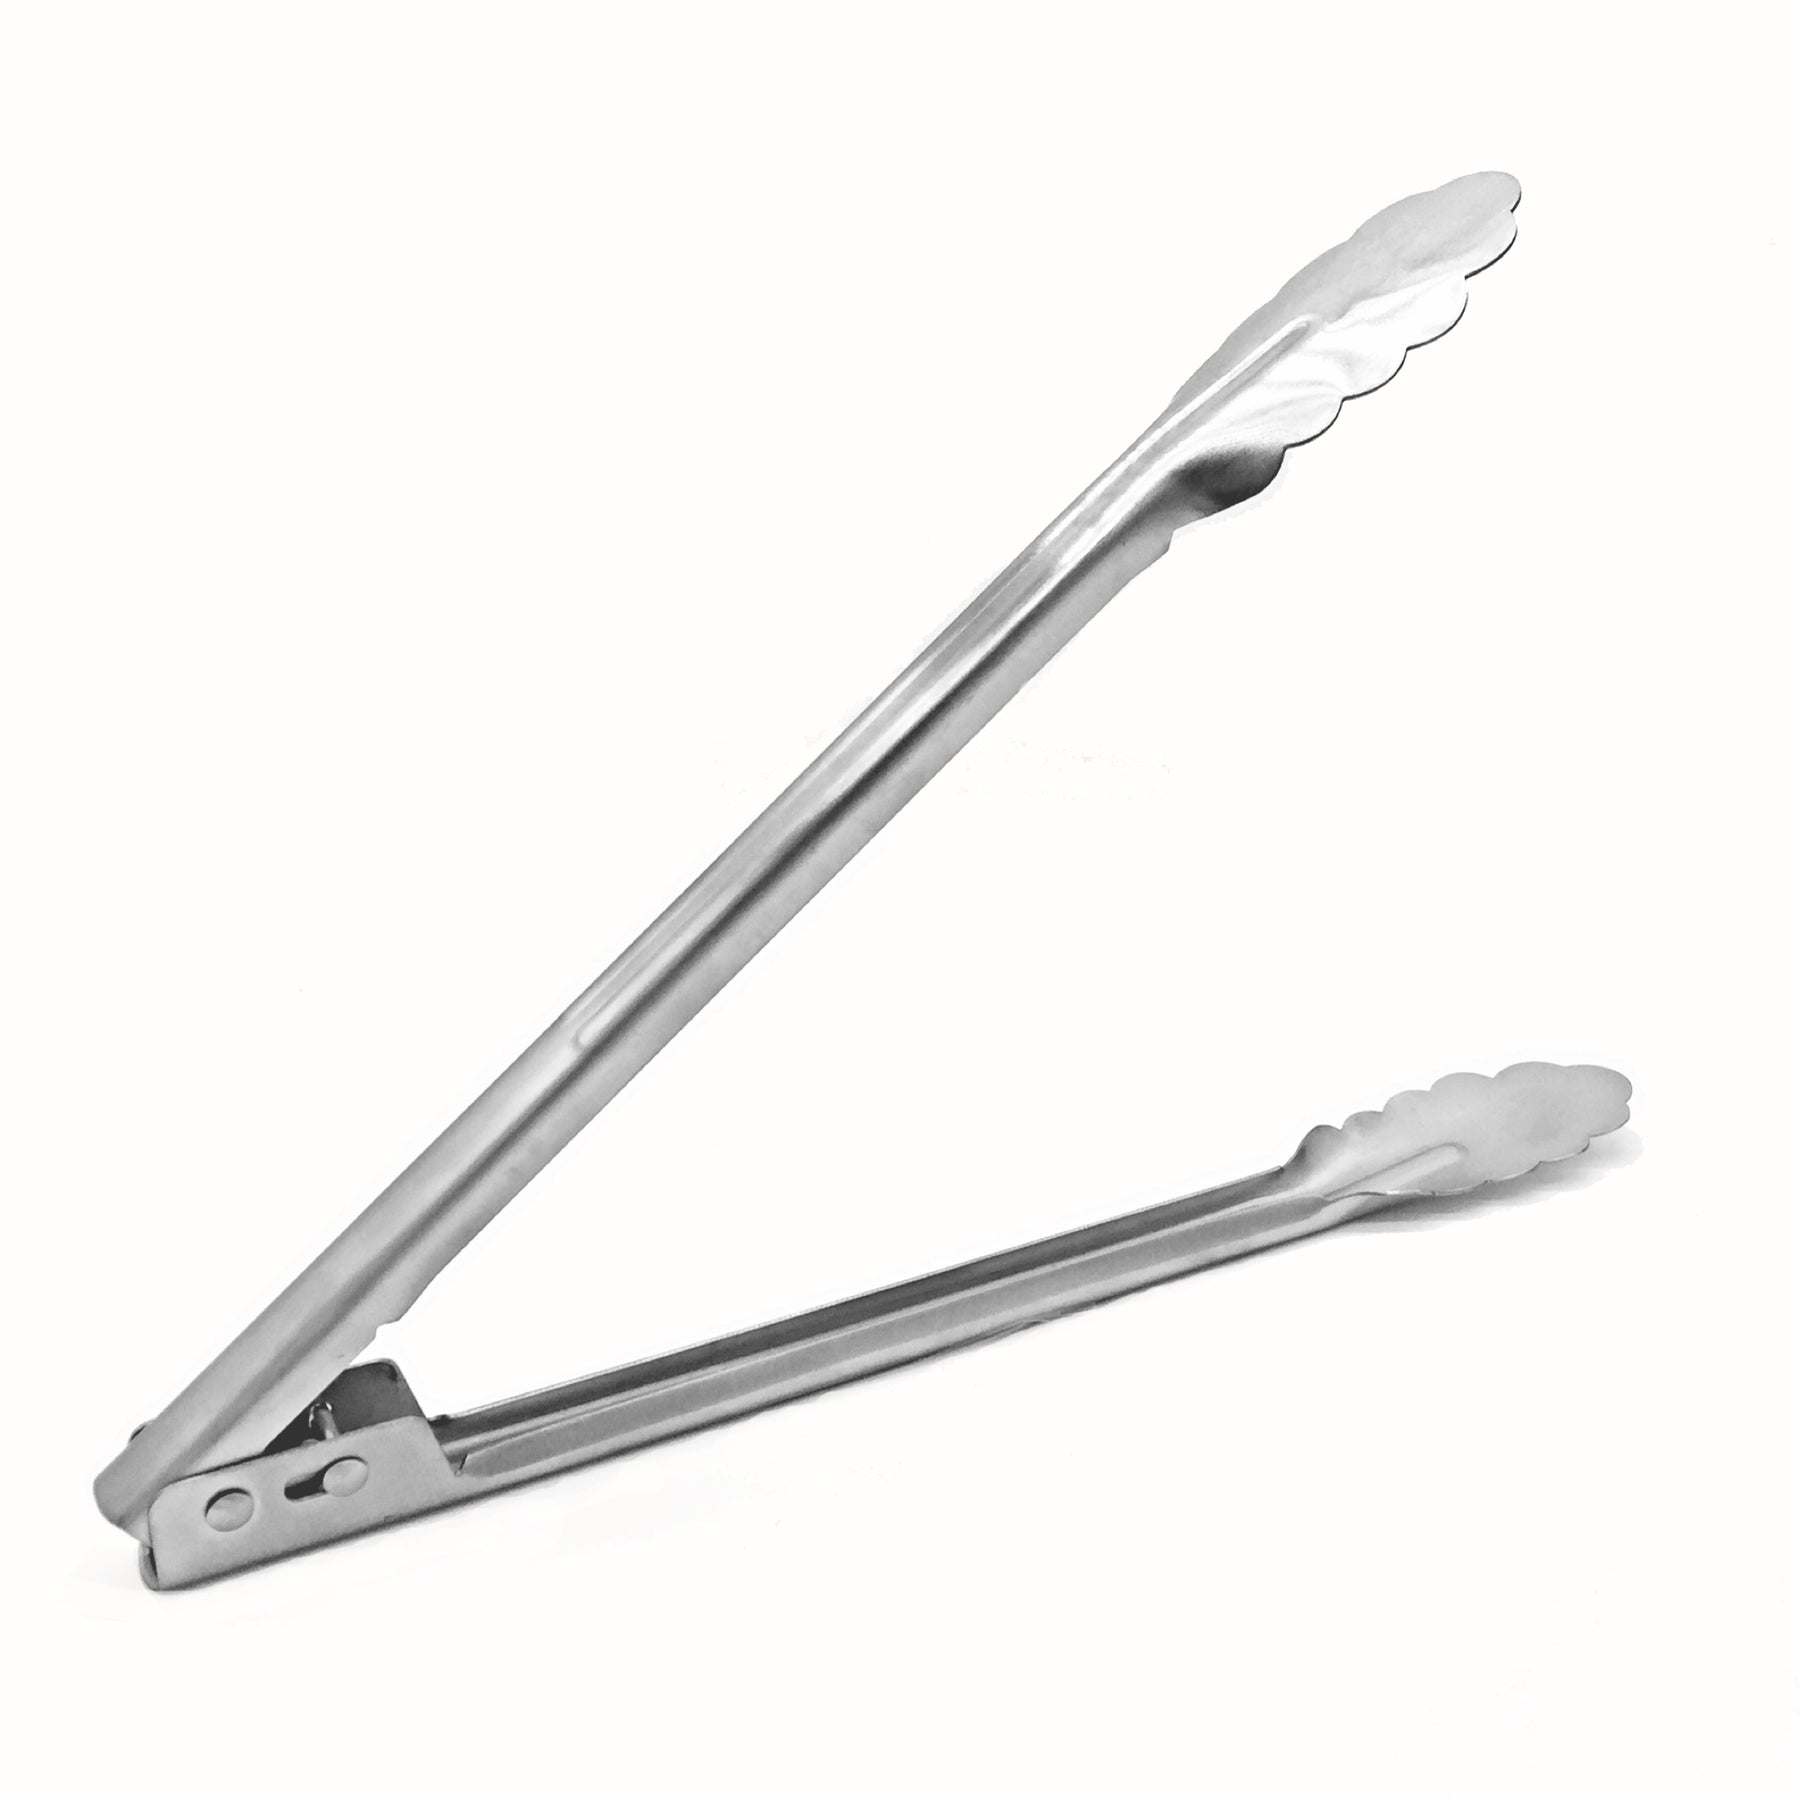 12 Inch One Hand Operation Cooking BBQ Tongs Stainless Steel